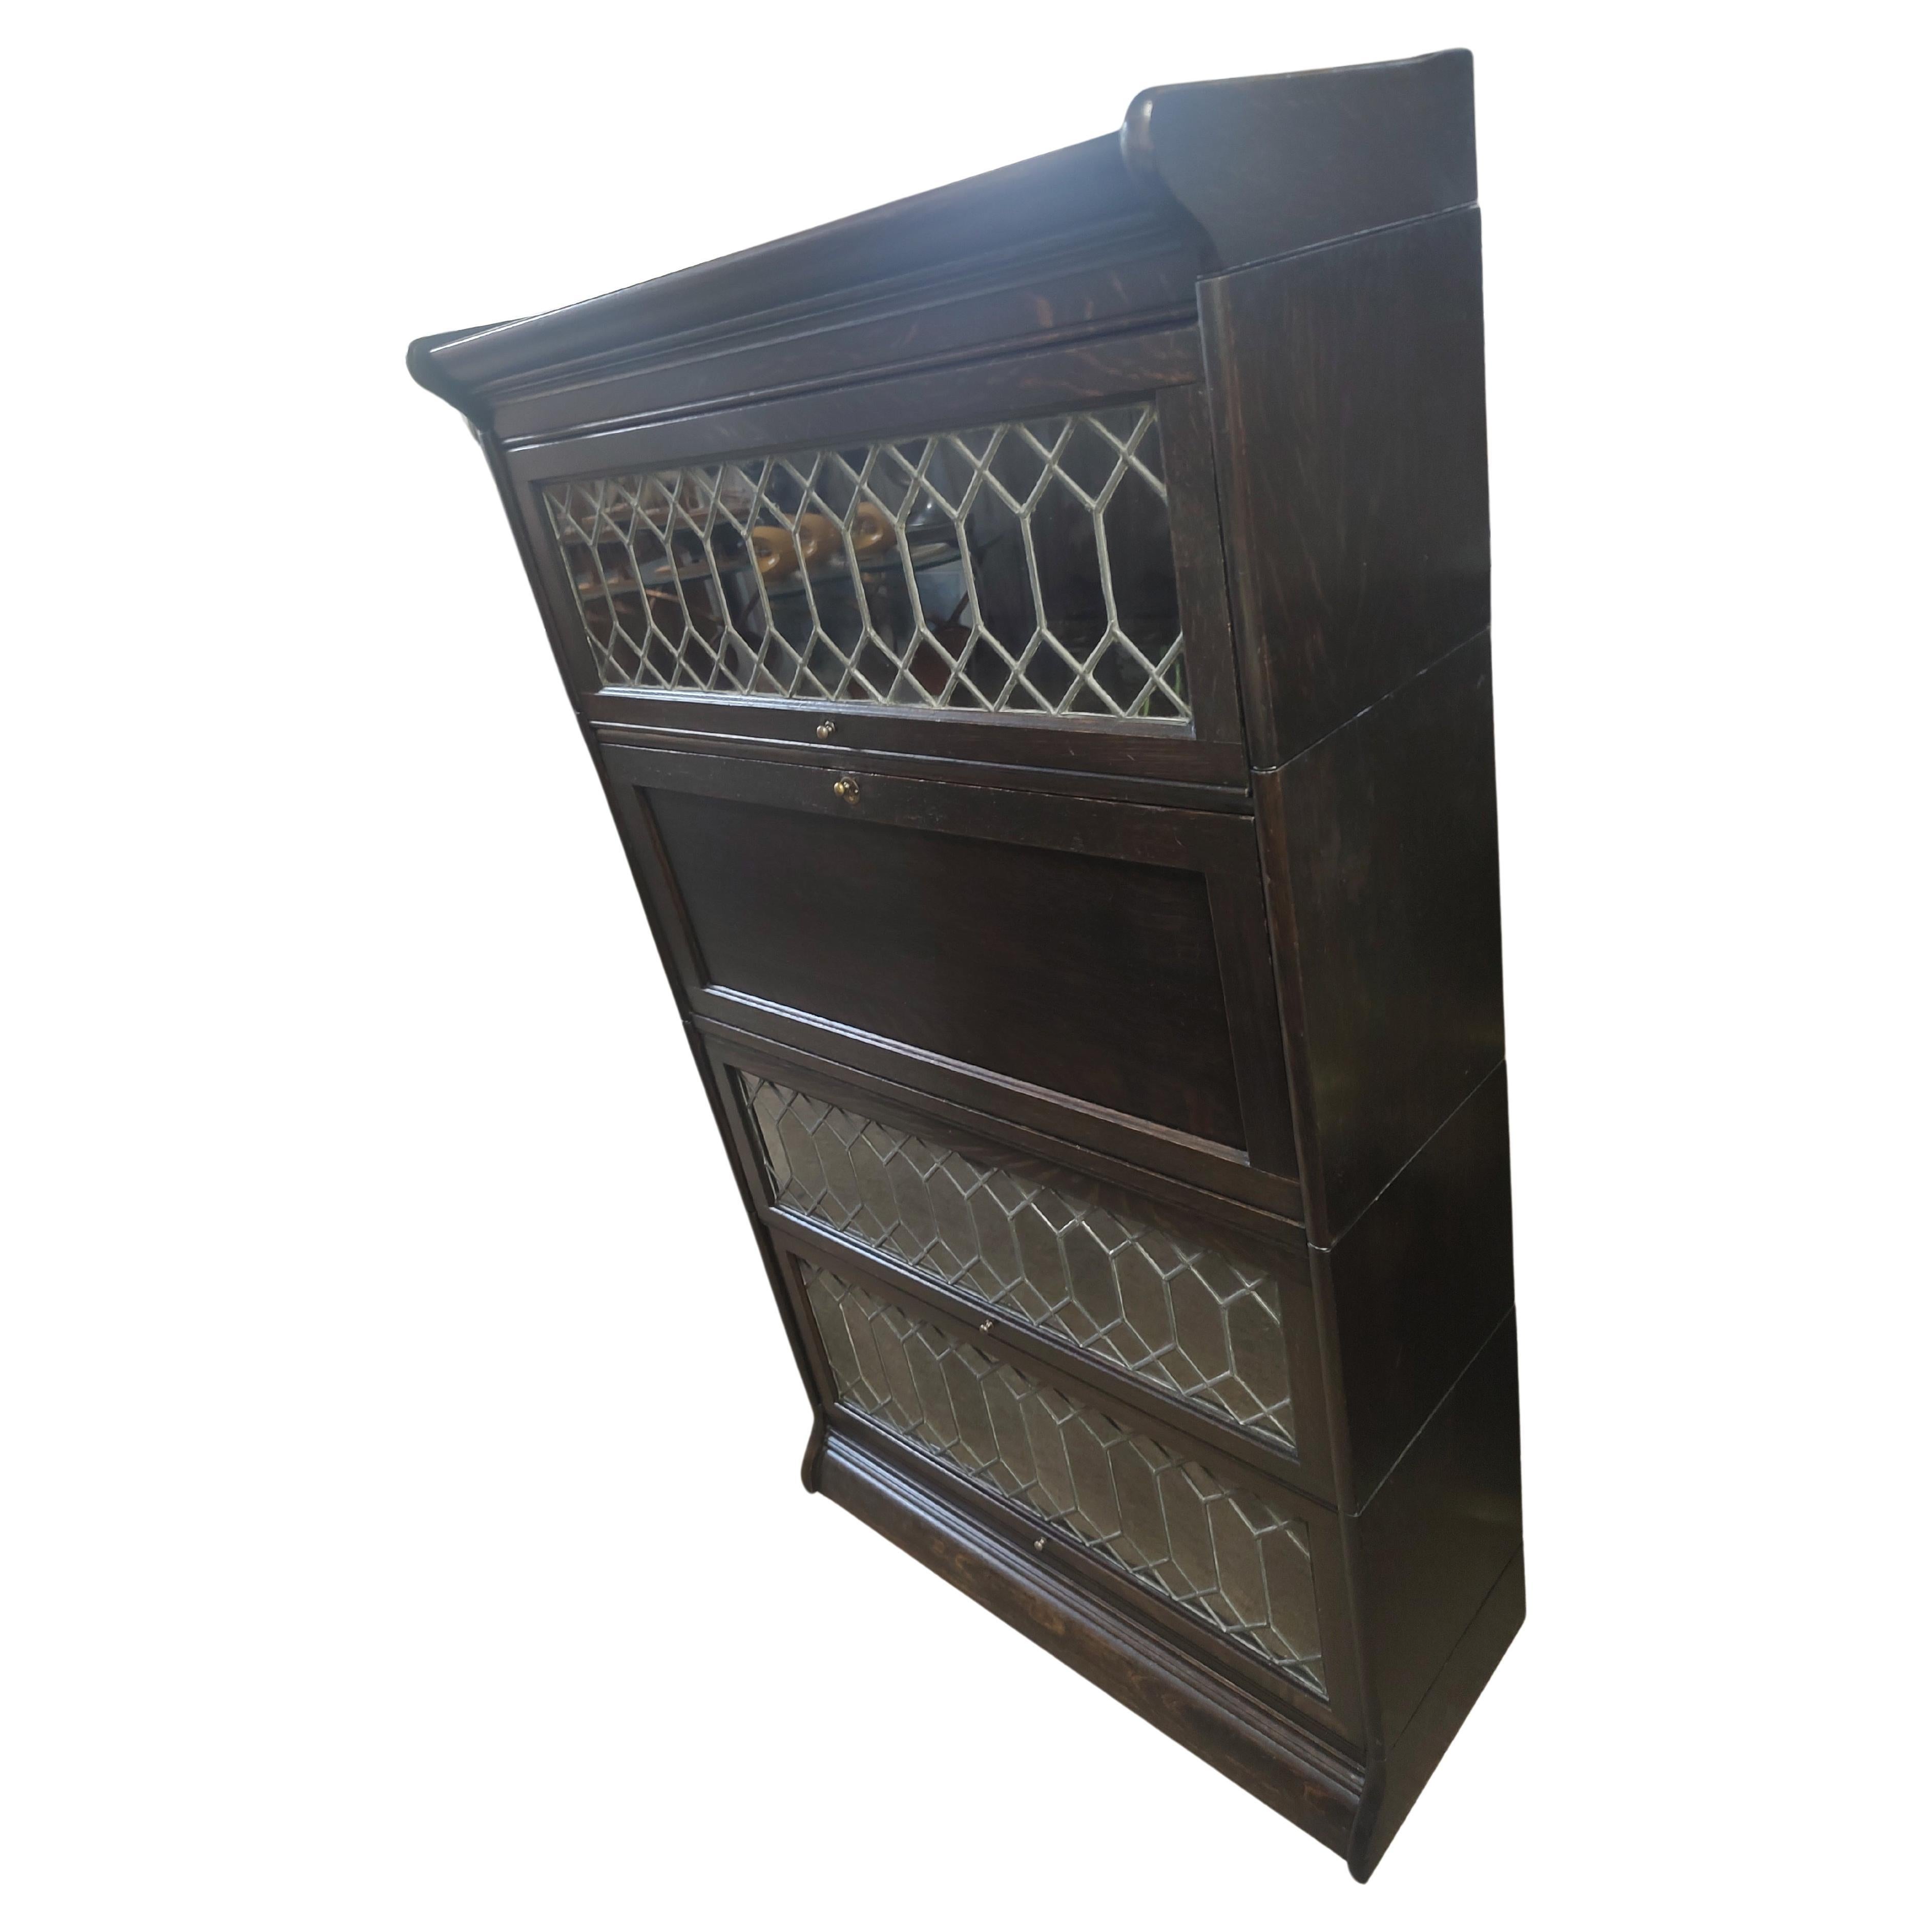 Early 20th C Oak Leaded Glass Bookcase W Desk attributed to Globe Wernicke  In Good Condition For Sale In Port Jervis, NY